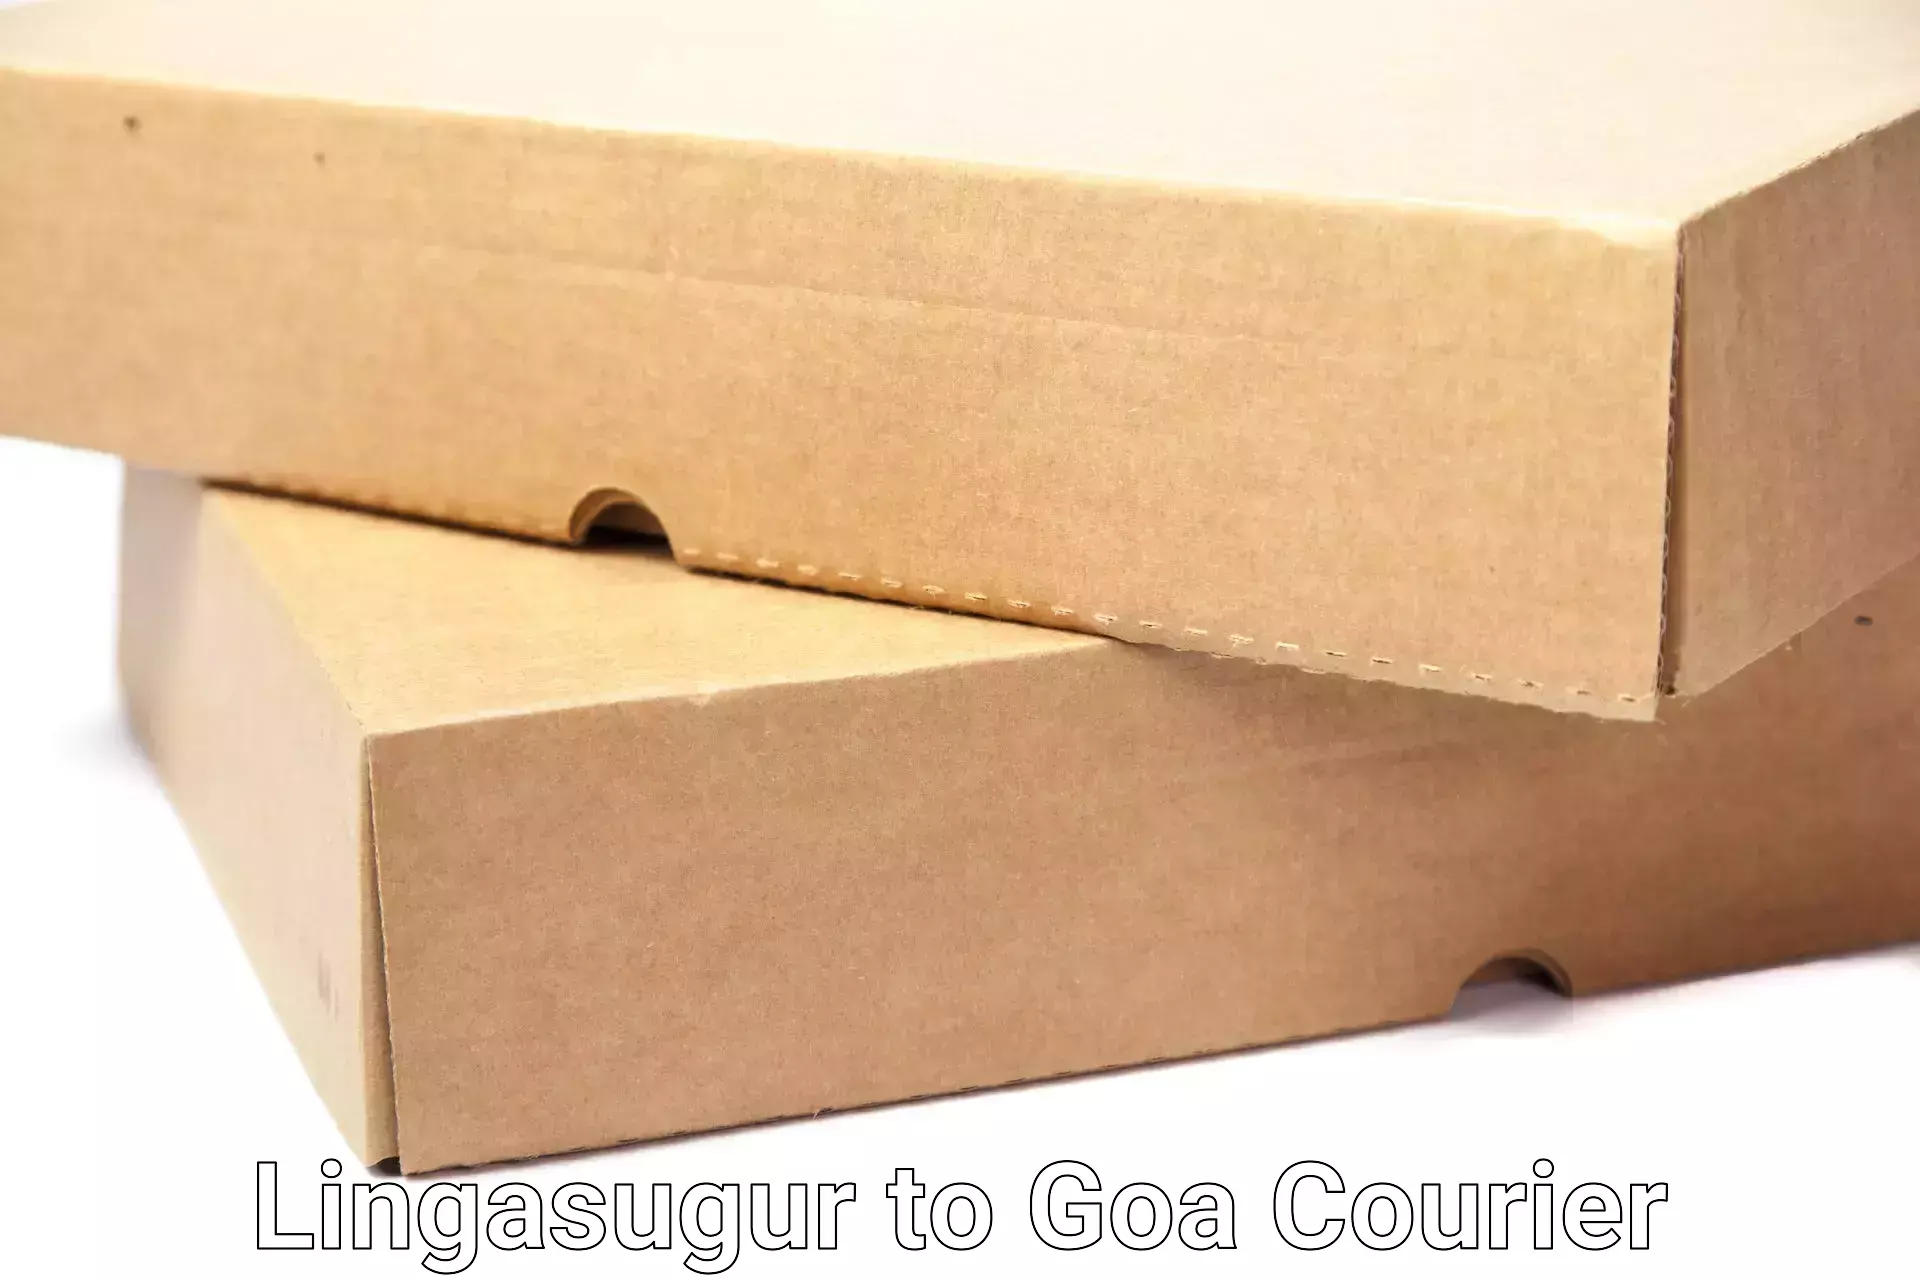 Efficient household movers Lingasugur to Goa